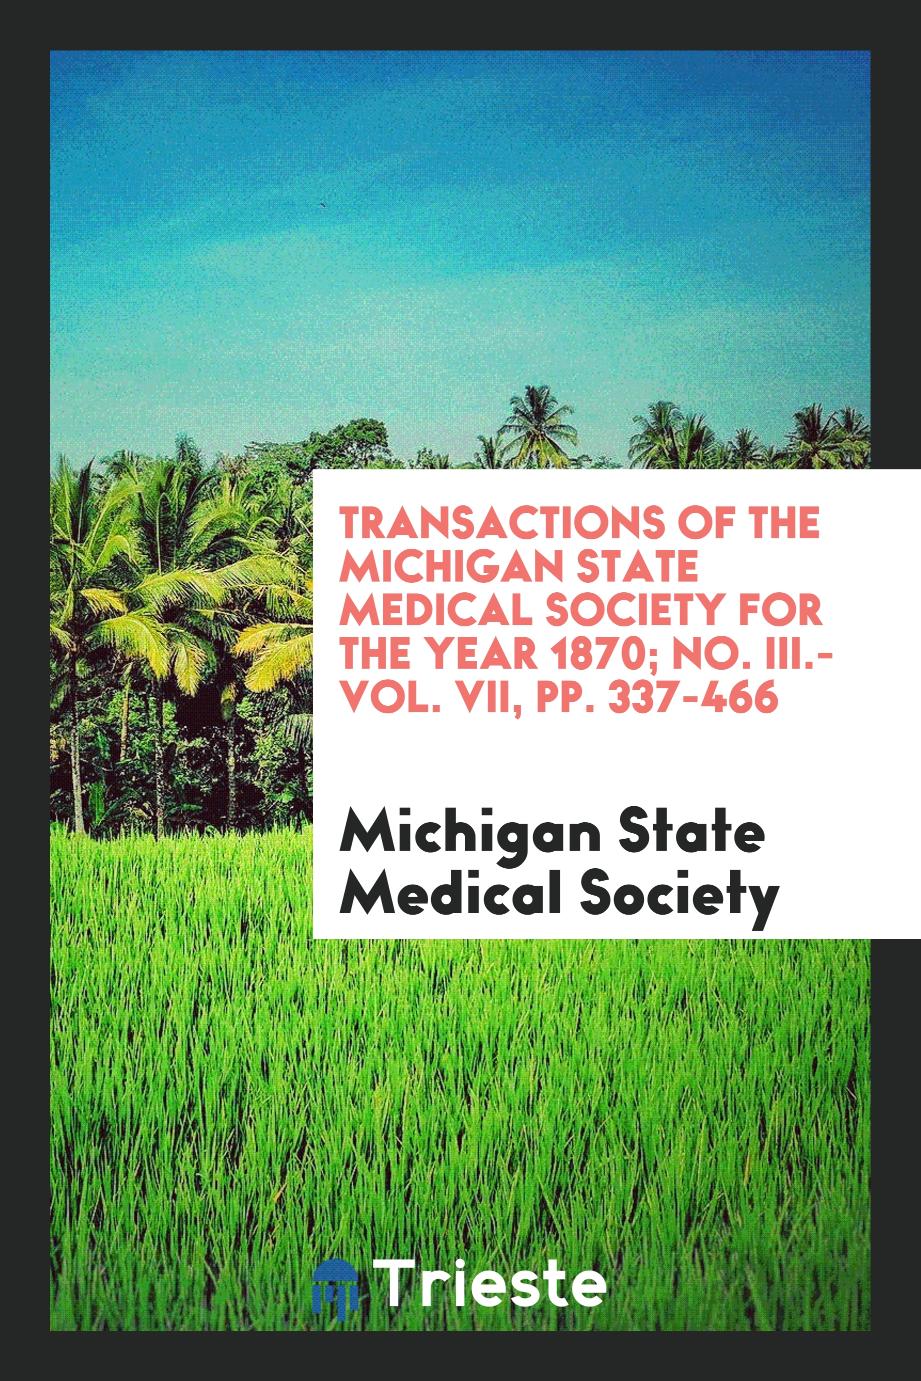 Transactions of the Michigan State Medical Society for the Year 1870; No. III.-Vol. VII, pp. 337-466